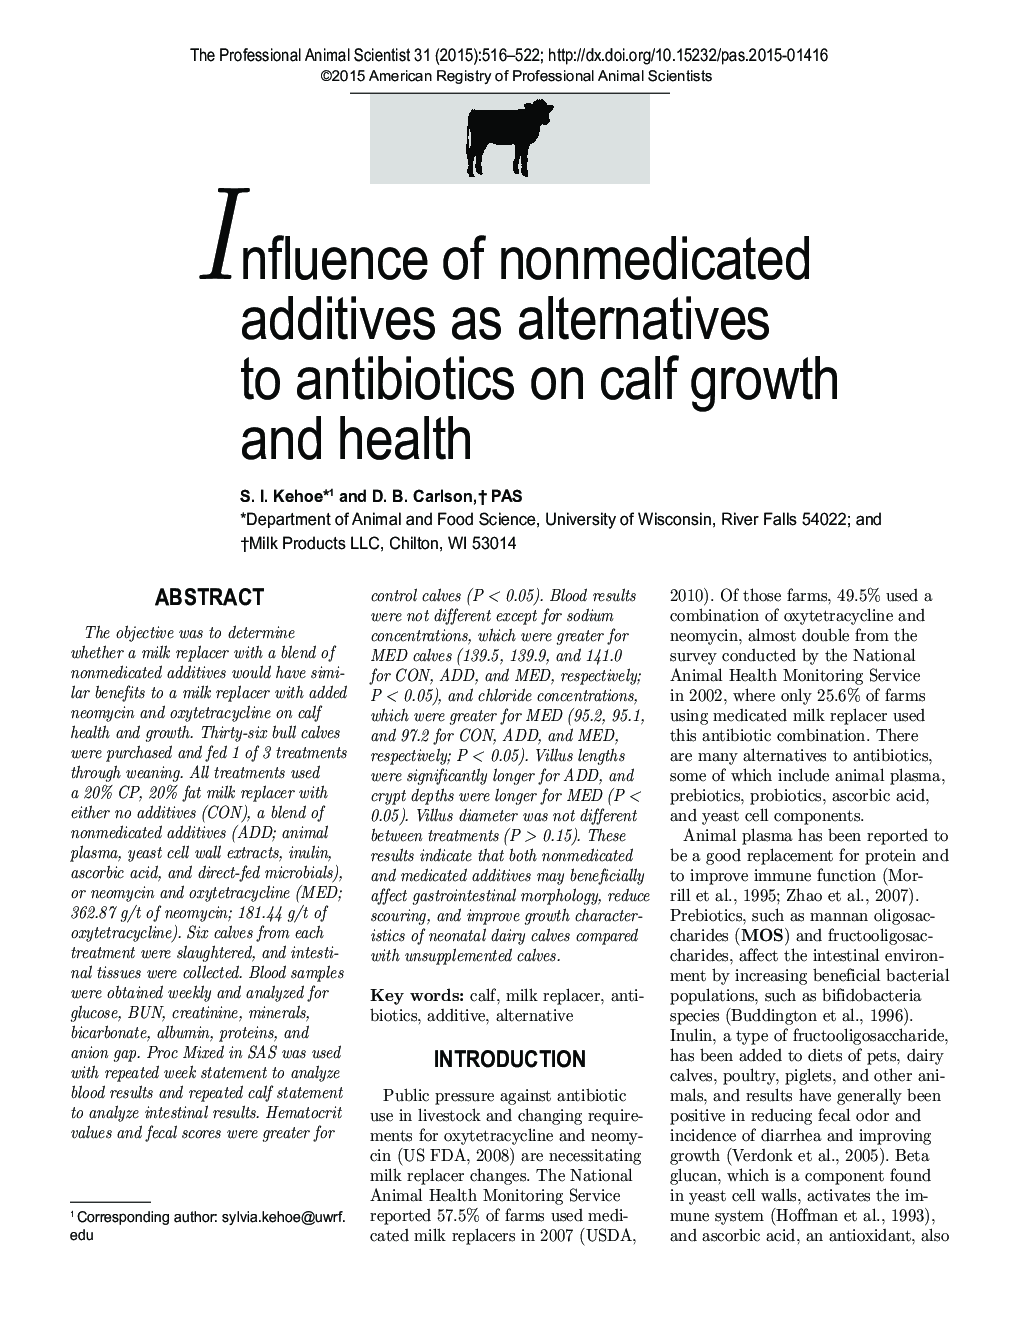 Influence of nonmedicated additives as alternatives to antibiotics on calf growth and health